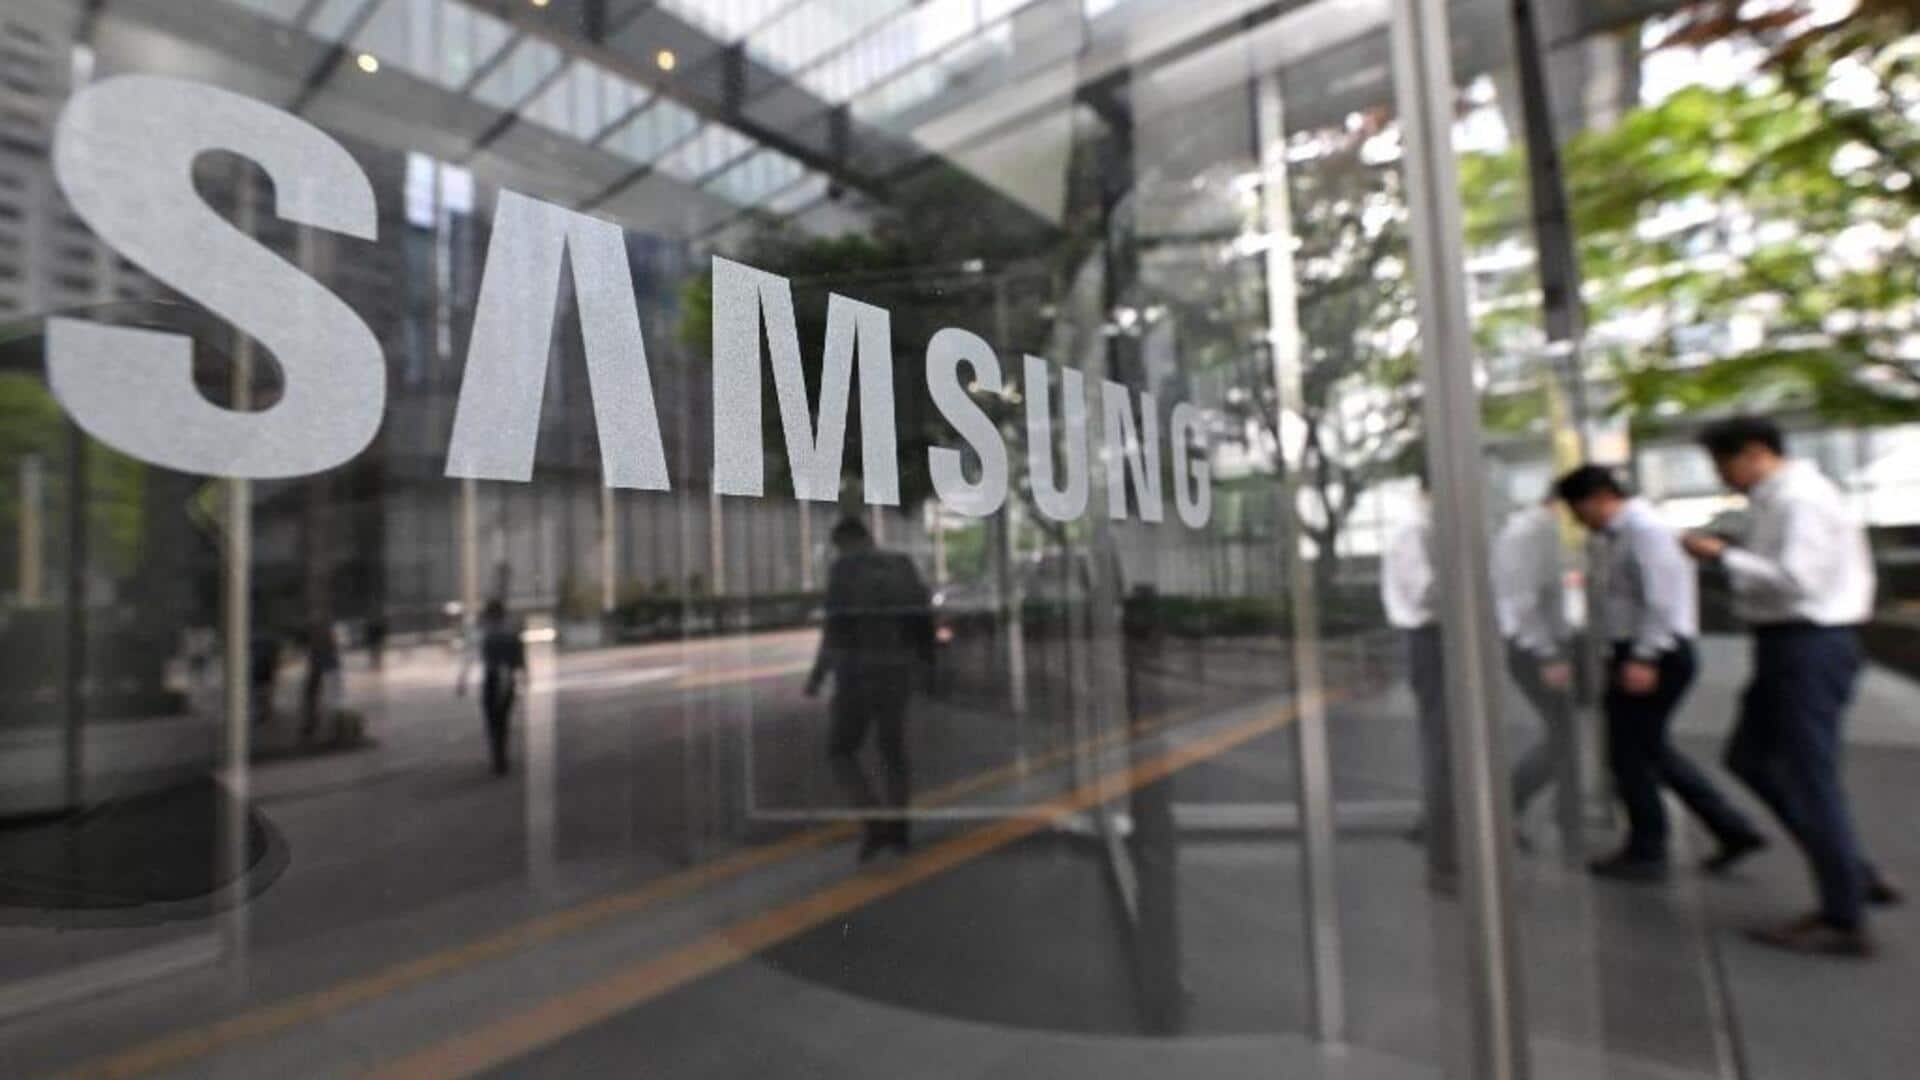 Samsung workers strike for the first time in company's history